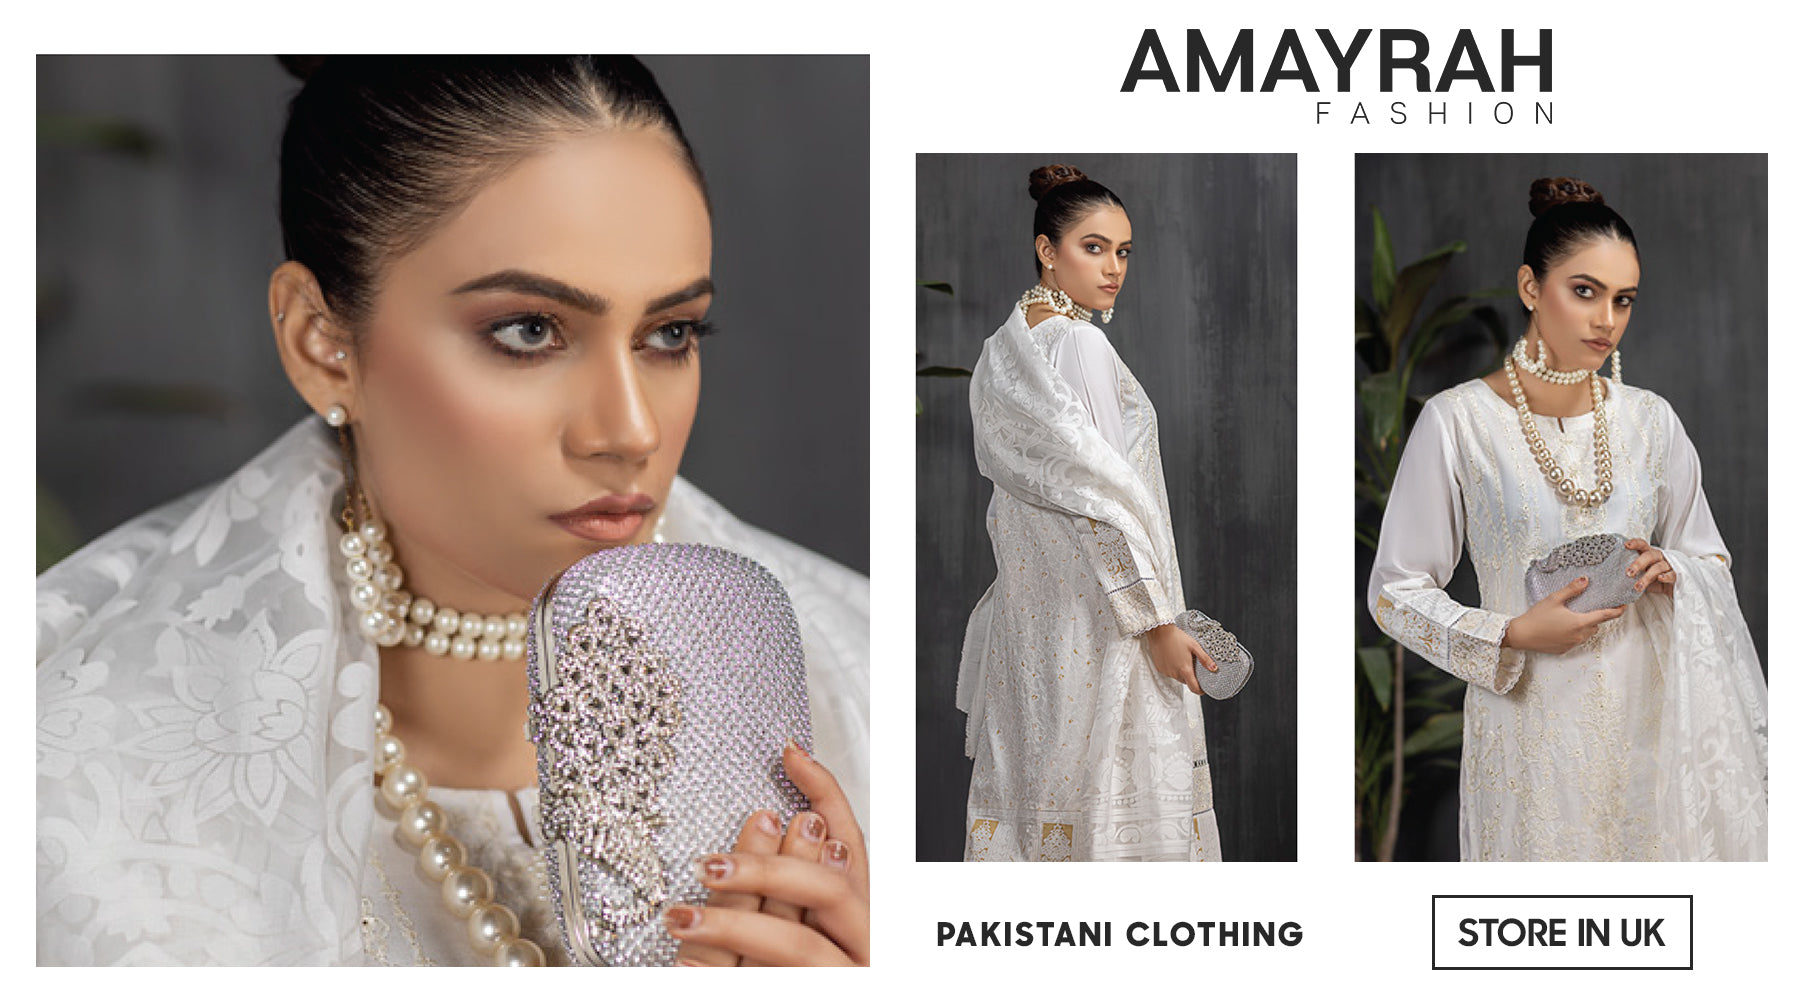 Your Premier Pakistani Clothing Store in the UK